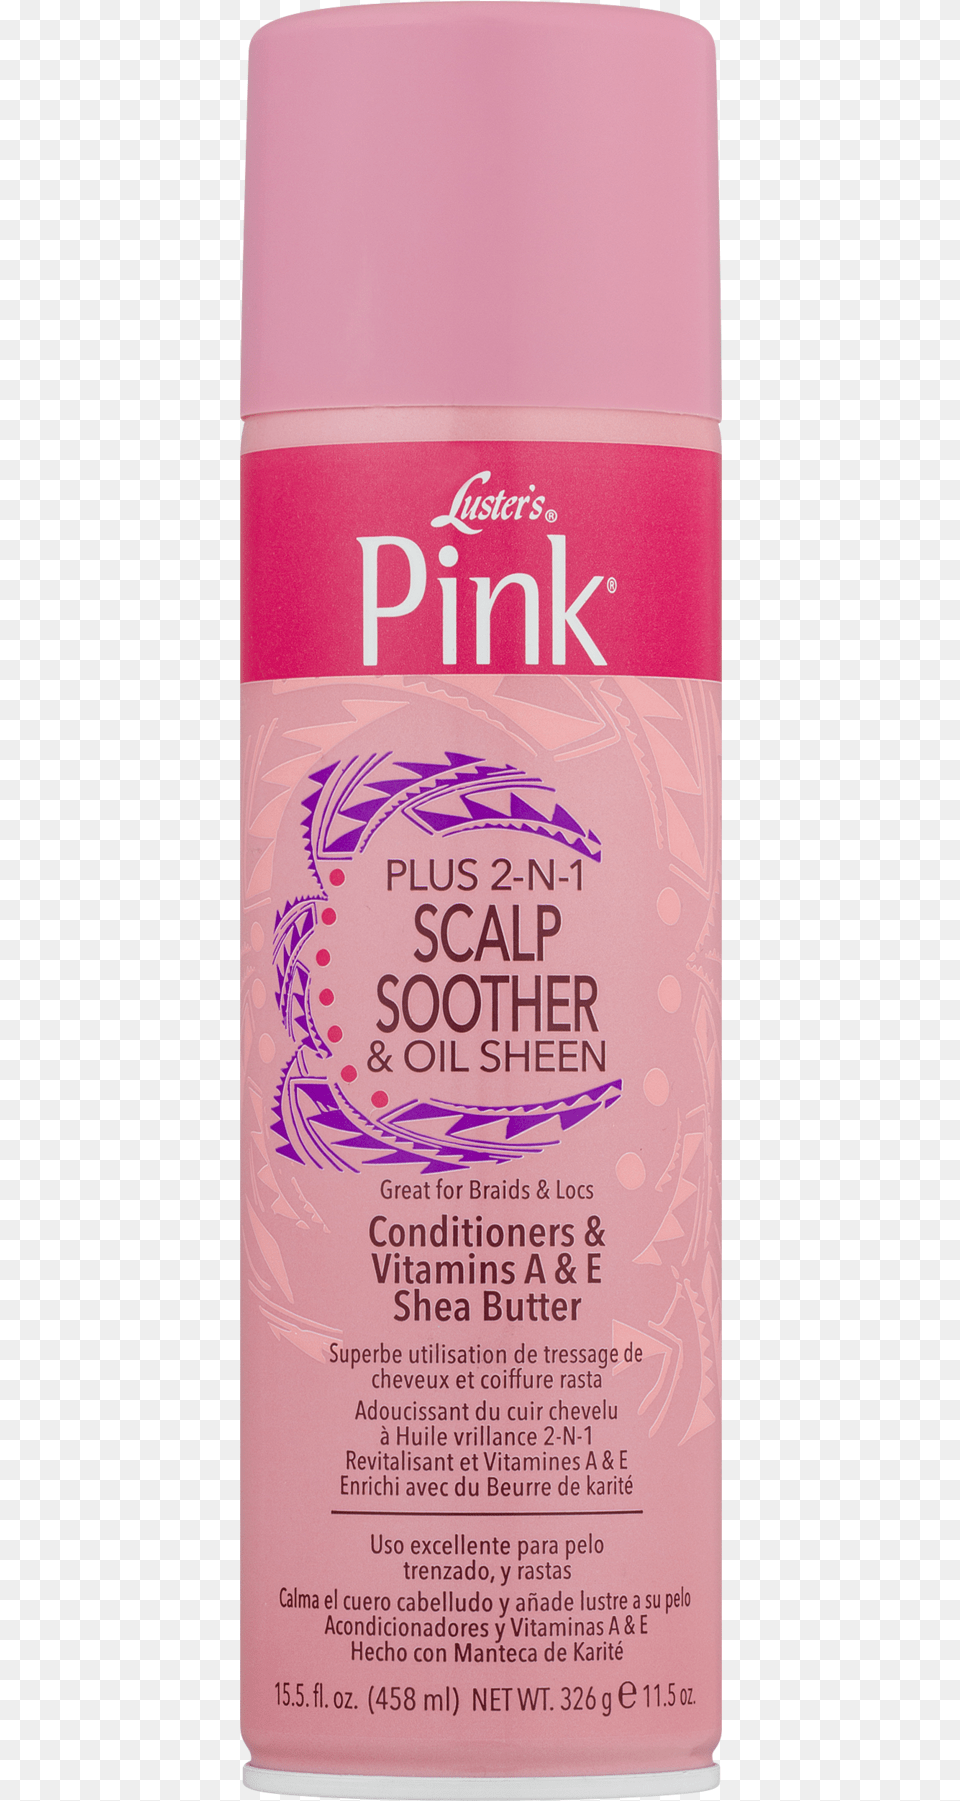 Pink Plus 2 In 1 Scalp Soother Amp Oil Sheen Luster39s Pink Oil Moisturizer Hair Lotion Original, Cosmetics, Deodorant Png Image